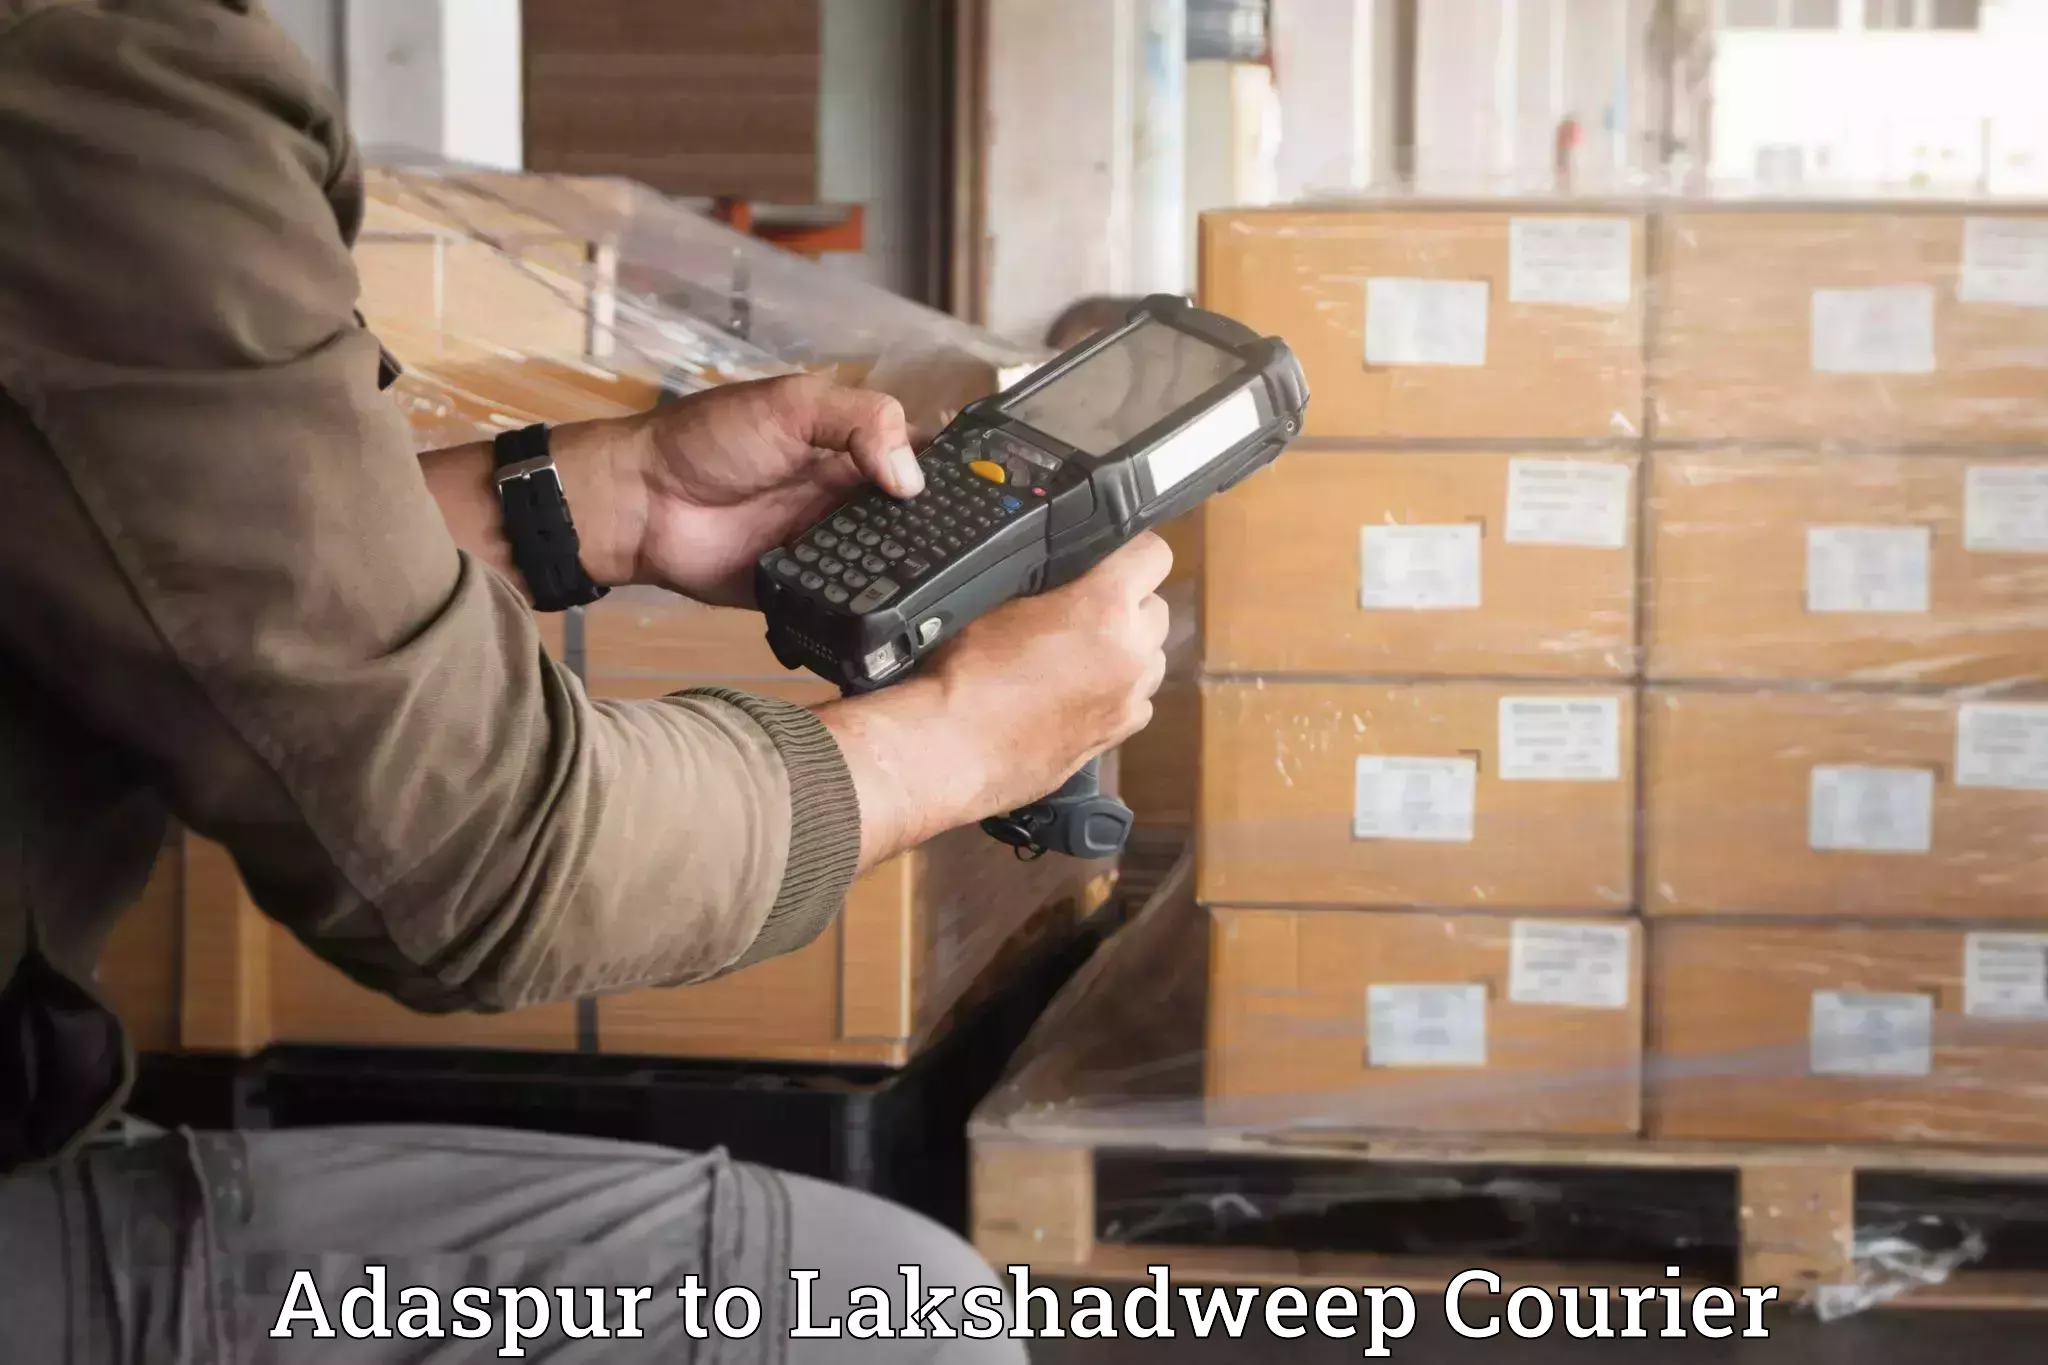 Efficient packing services Adaspur to Lakshadweep